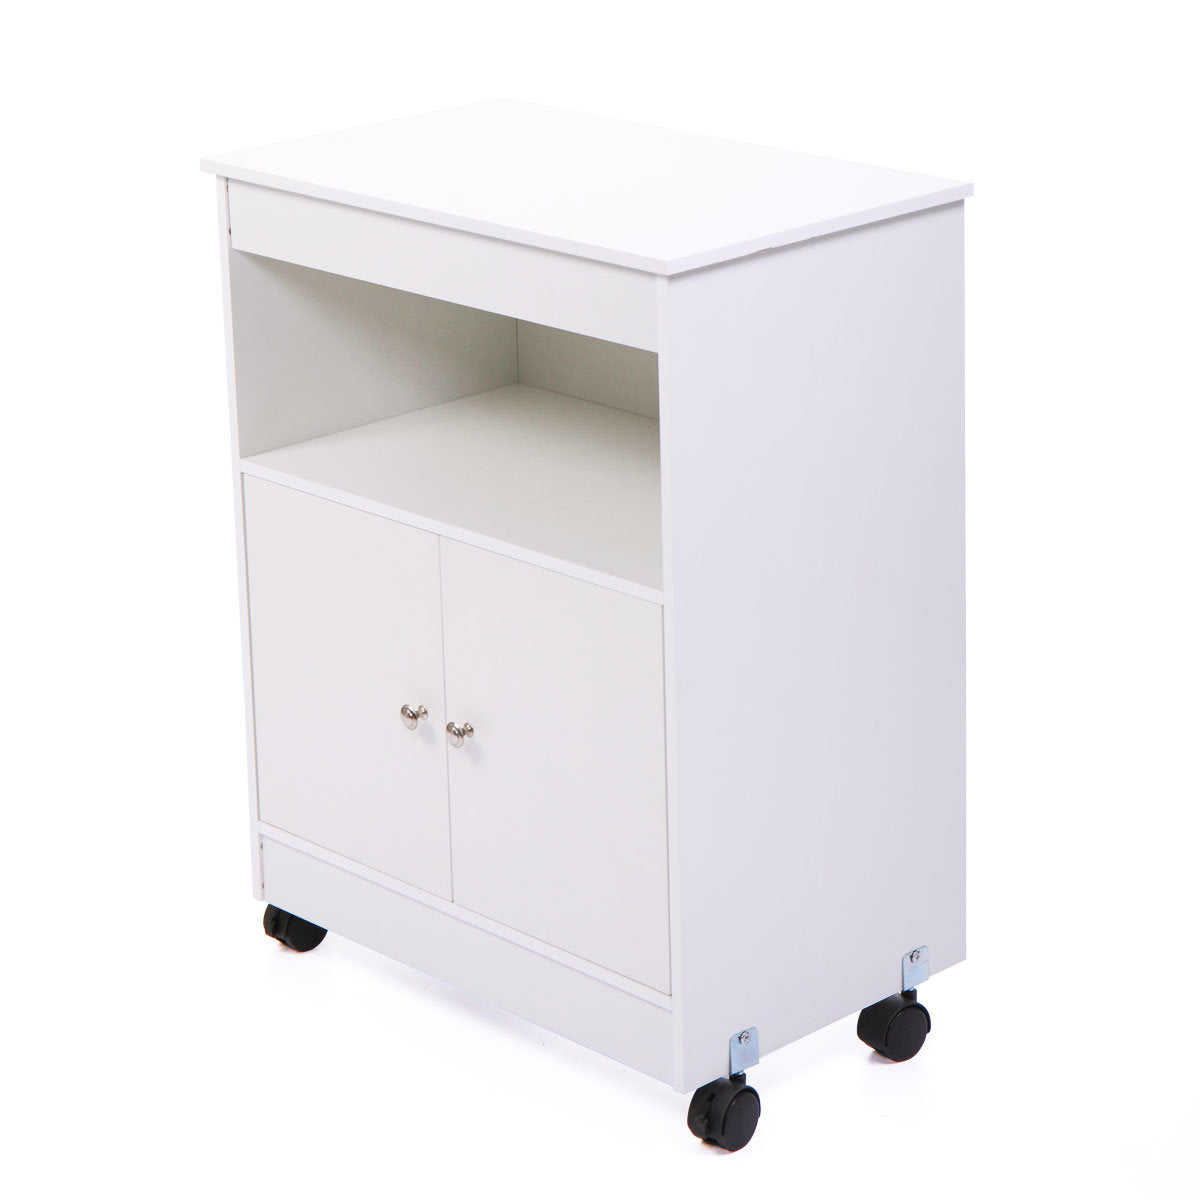 Wood Kitchen Microwave Cabinet Cart with 4 Universal Wheels and Roomy Inner Space for Home Use; White